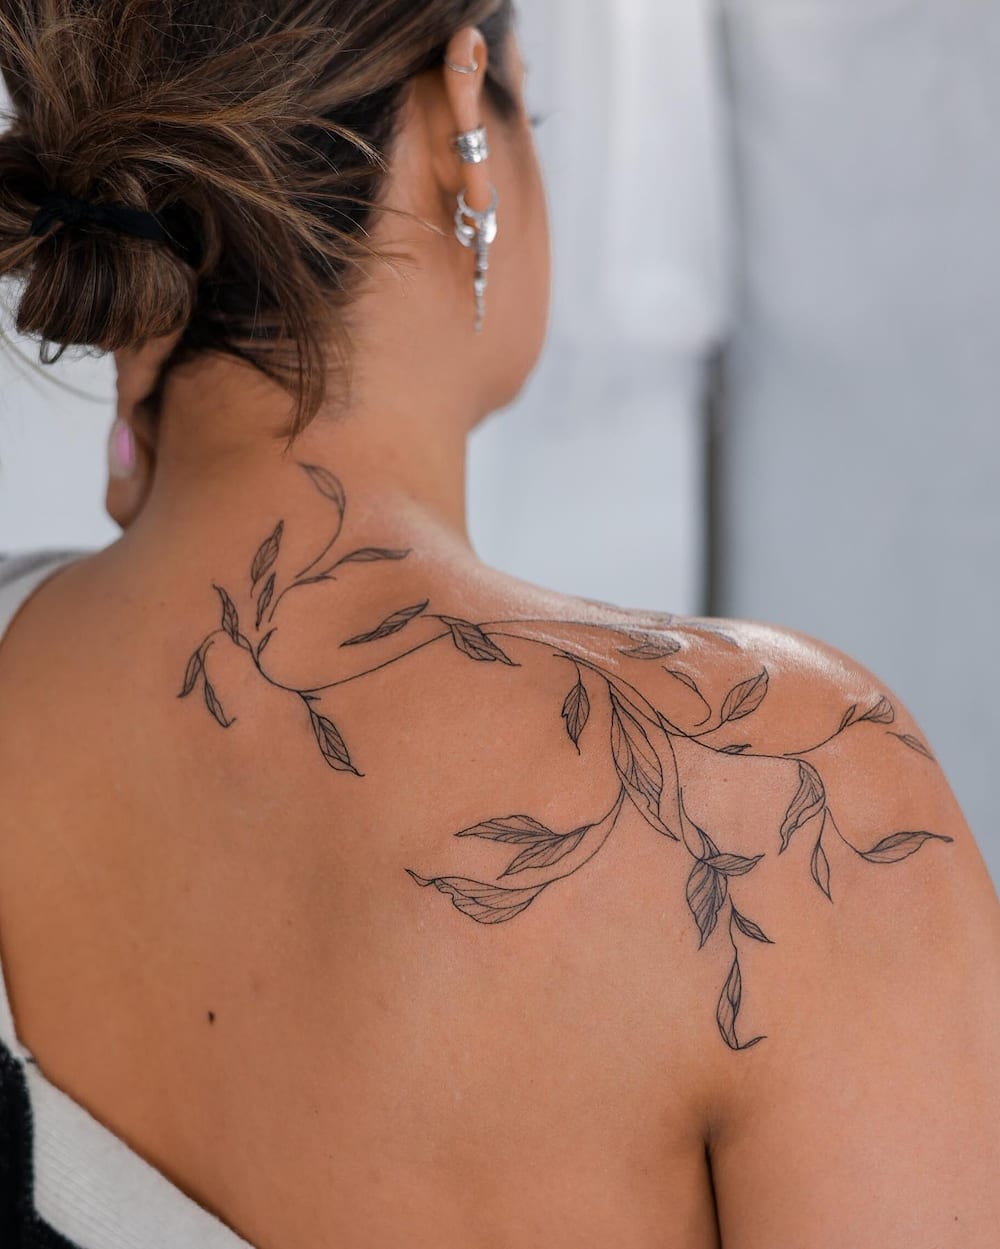 A woman with a vine shoulder wrap tattoo on her back.